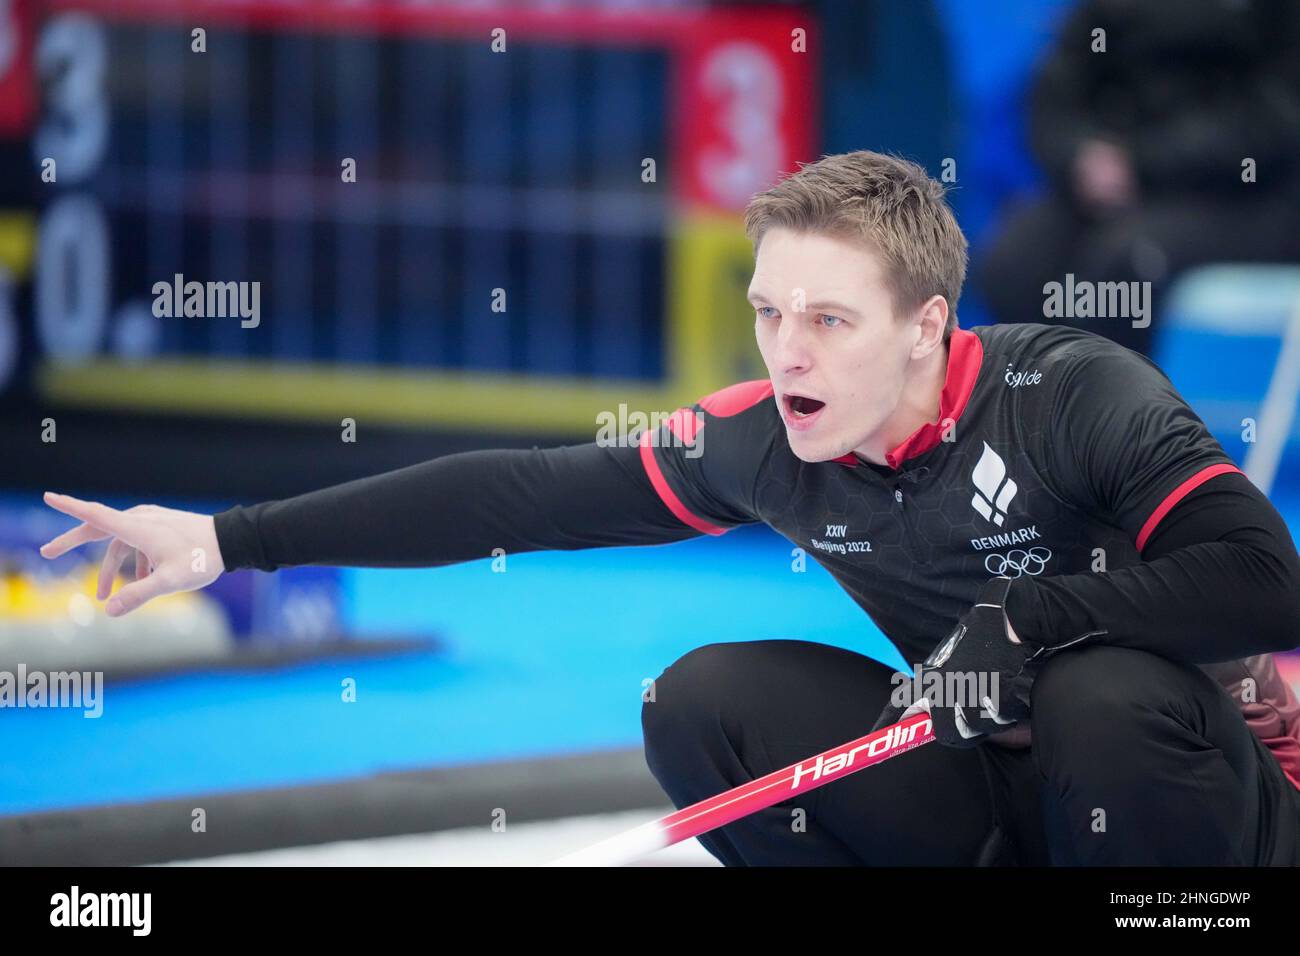 Beijing, China. 17th Feb, 2022. Mikkel Krause (R) of Denmark competes during the curling men's round robin session 12 of Beijing 2022 Winter Olympics between the United States and Denmark at National Aquatics Centre in Beijing, capital of China, Feb. 17, 2022. Credit: Zhou Mi/Xinhua/Alamy Live News Stock Photo